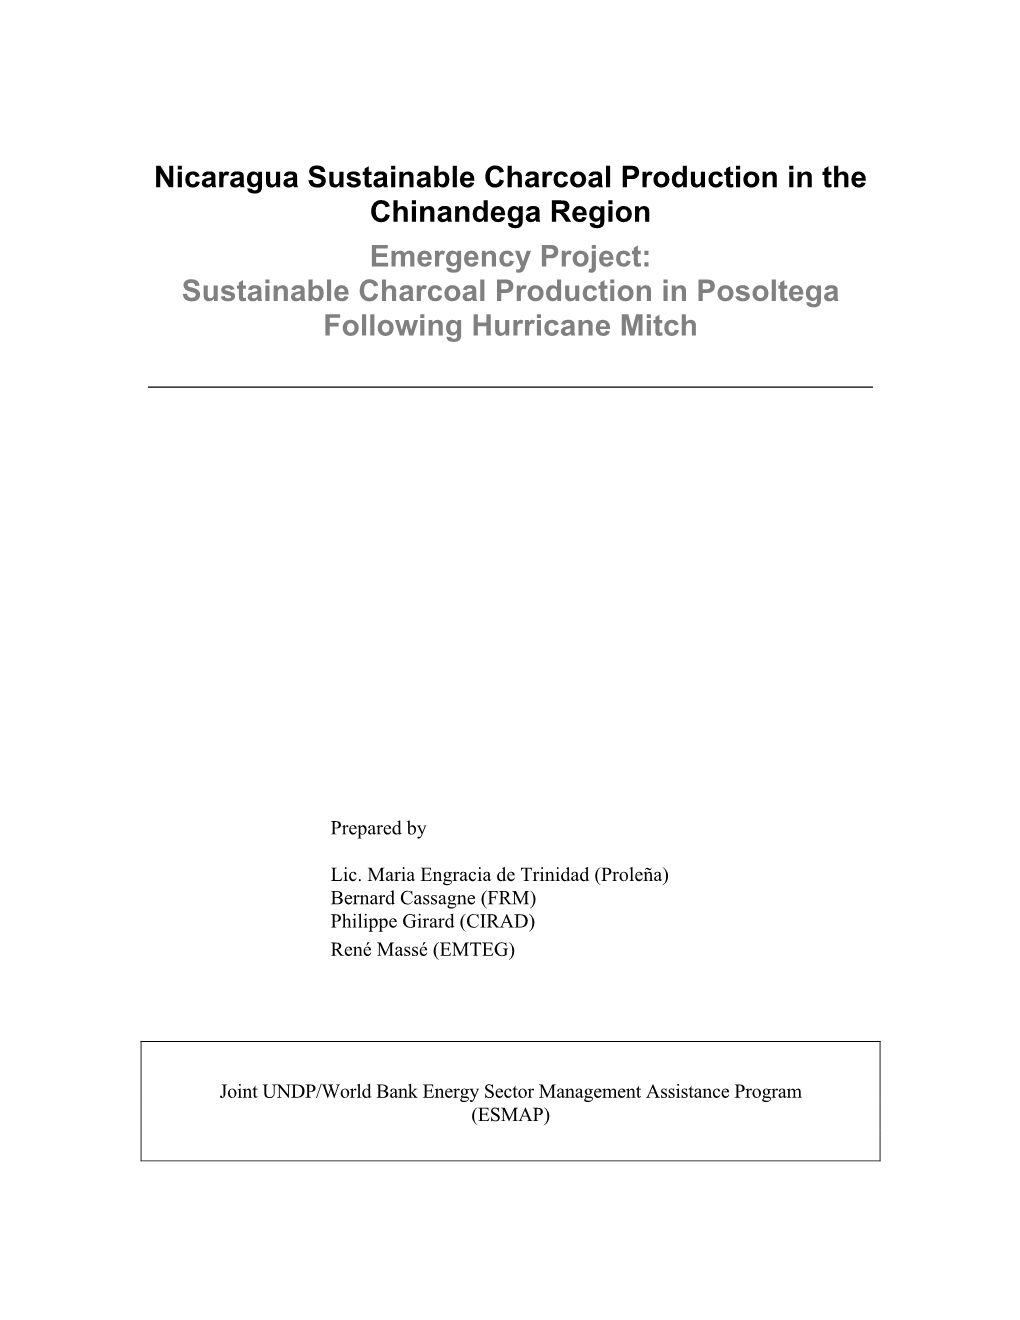 Nicaragua Sustainable Charcoal Production in the Chinandega Region Emergency Project: Sustainable Charcoal Production in Posoltega Following Hurricane Mitch